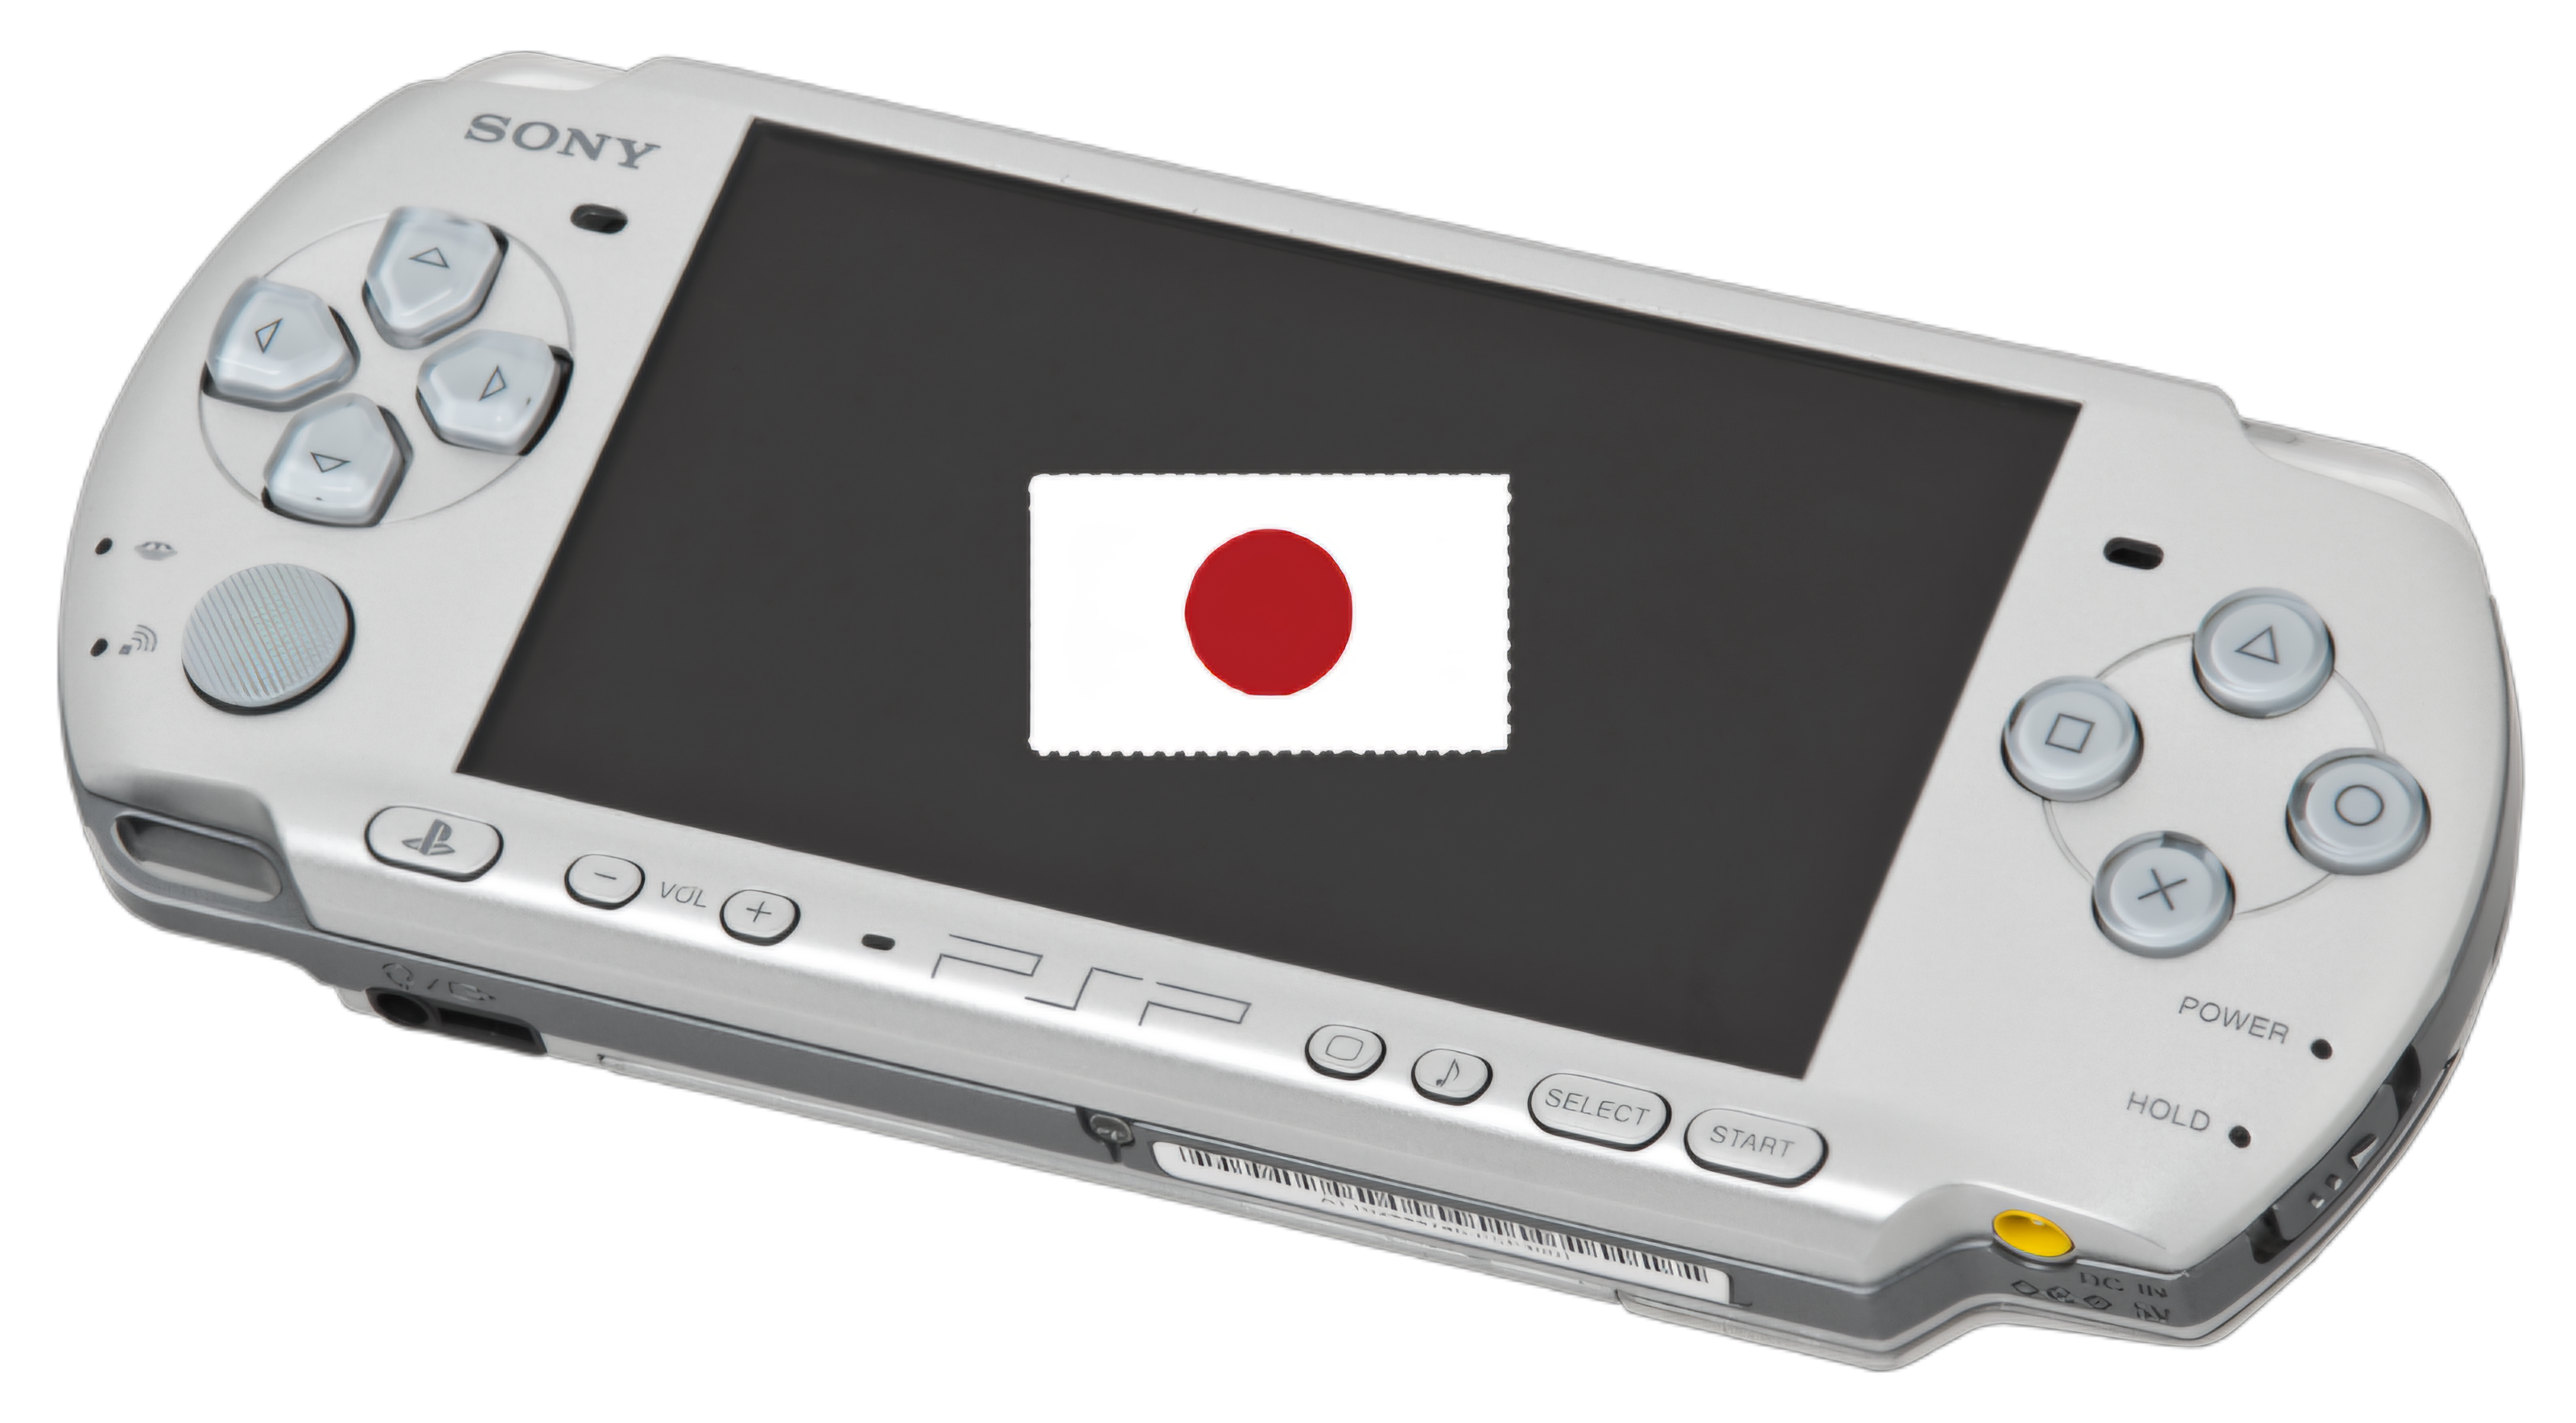 PlayStation Portable Silver Model 2000 Handheld Console (Japanese)